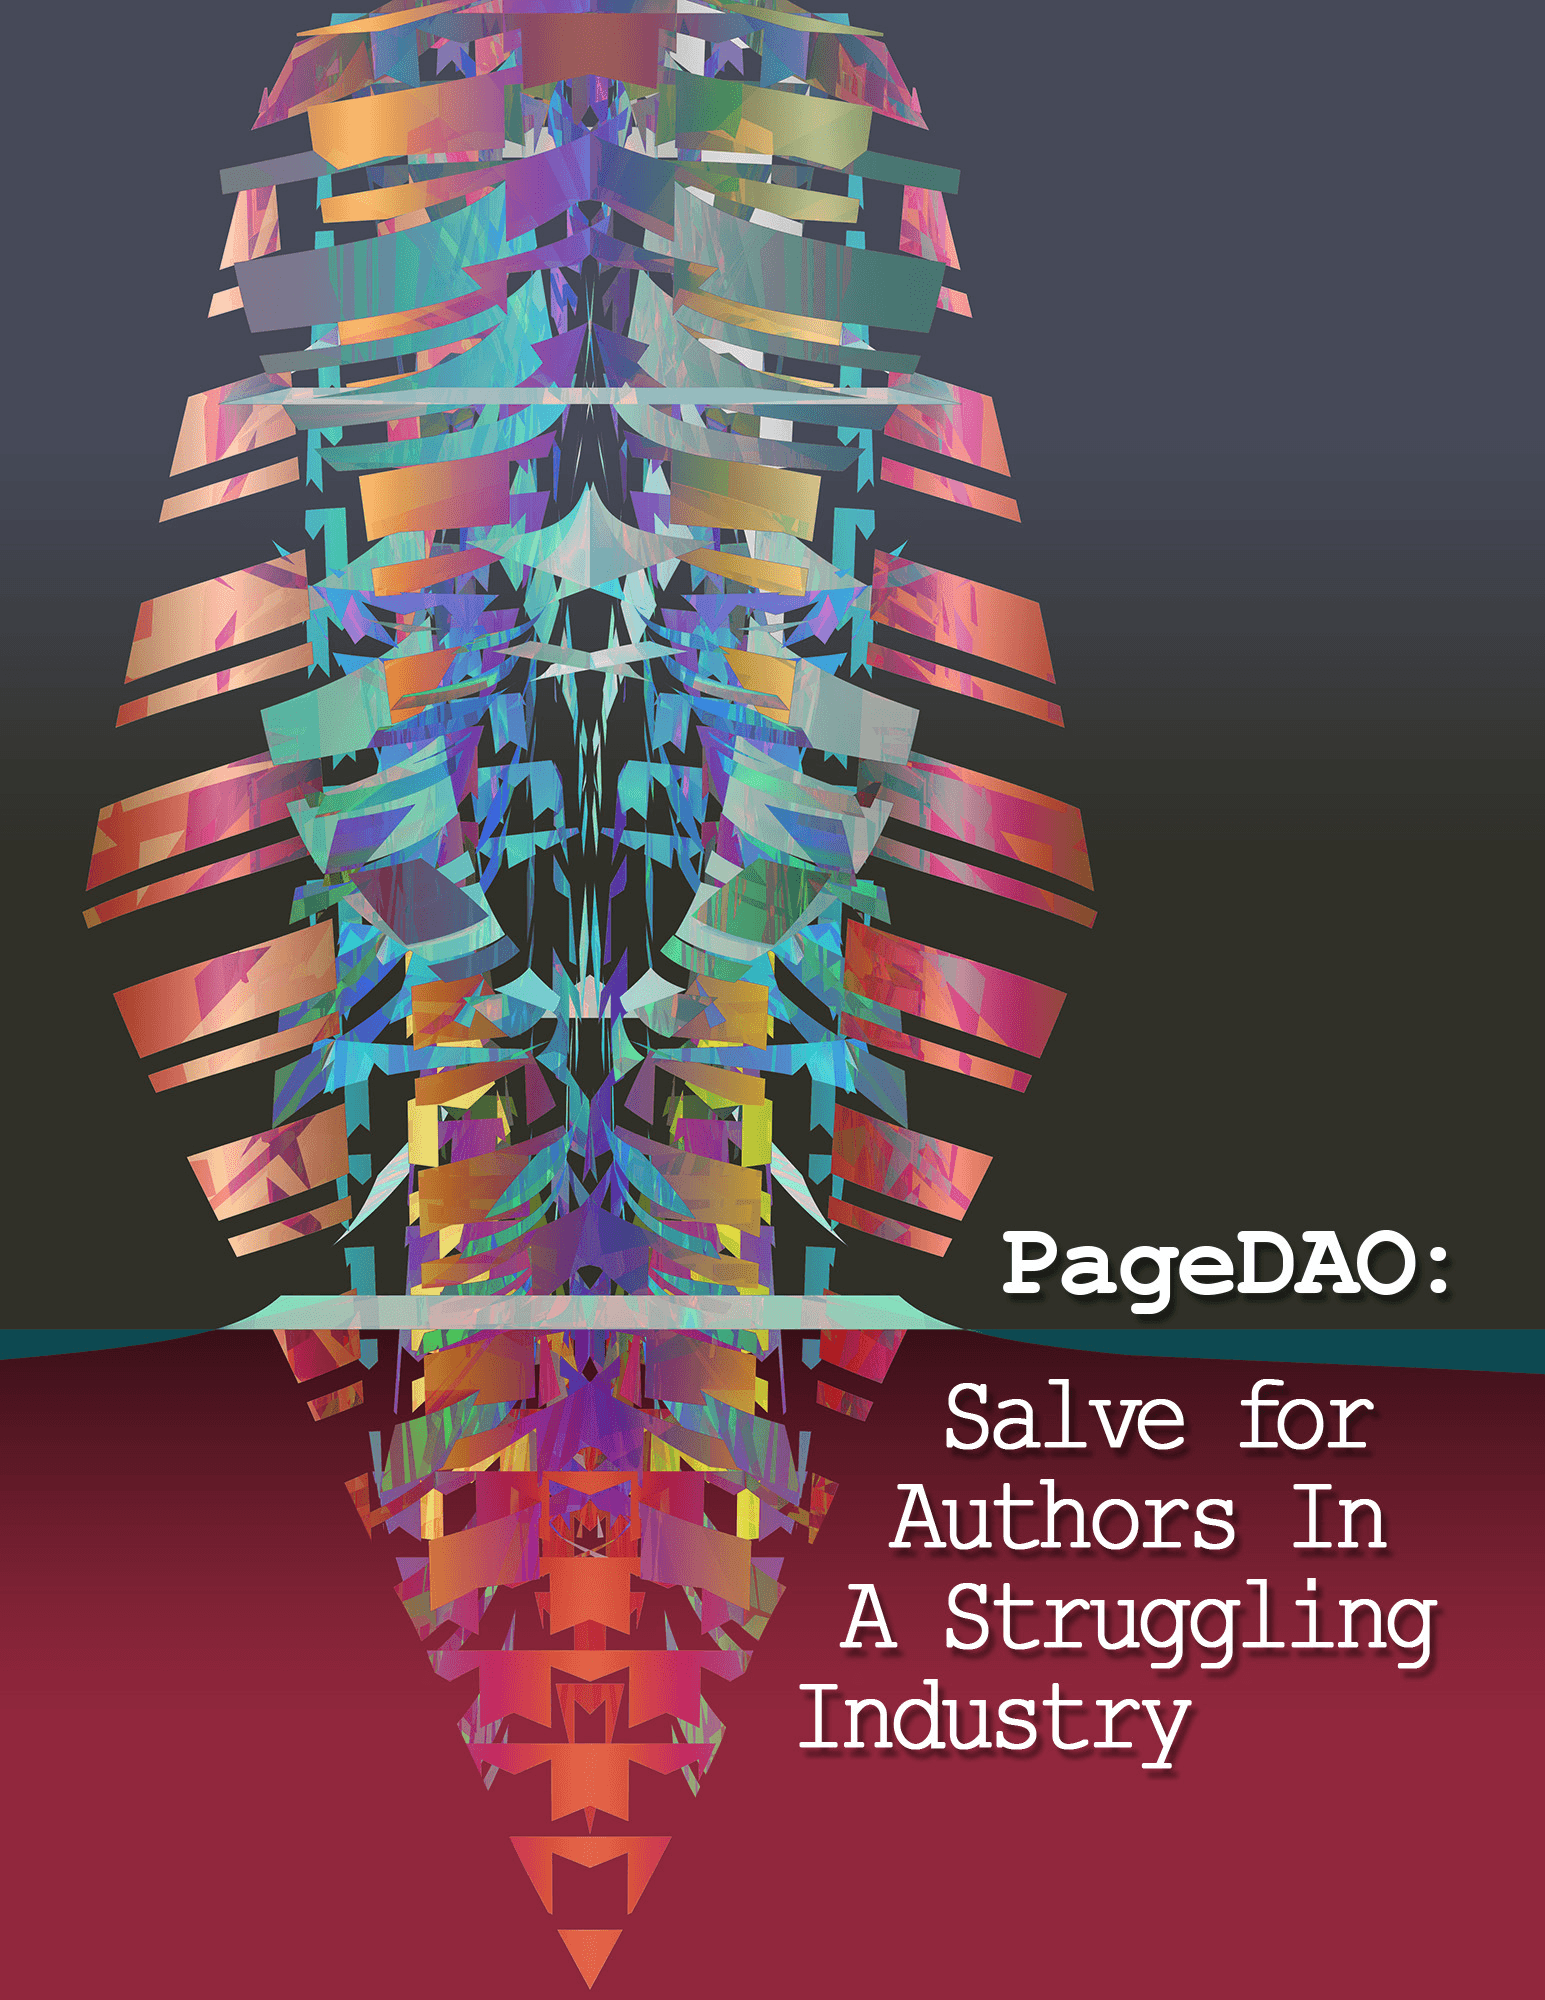 PageDAO: Salve for Authors In A Struggling Industry